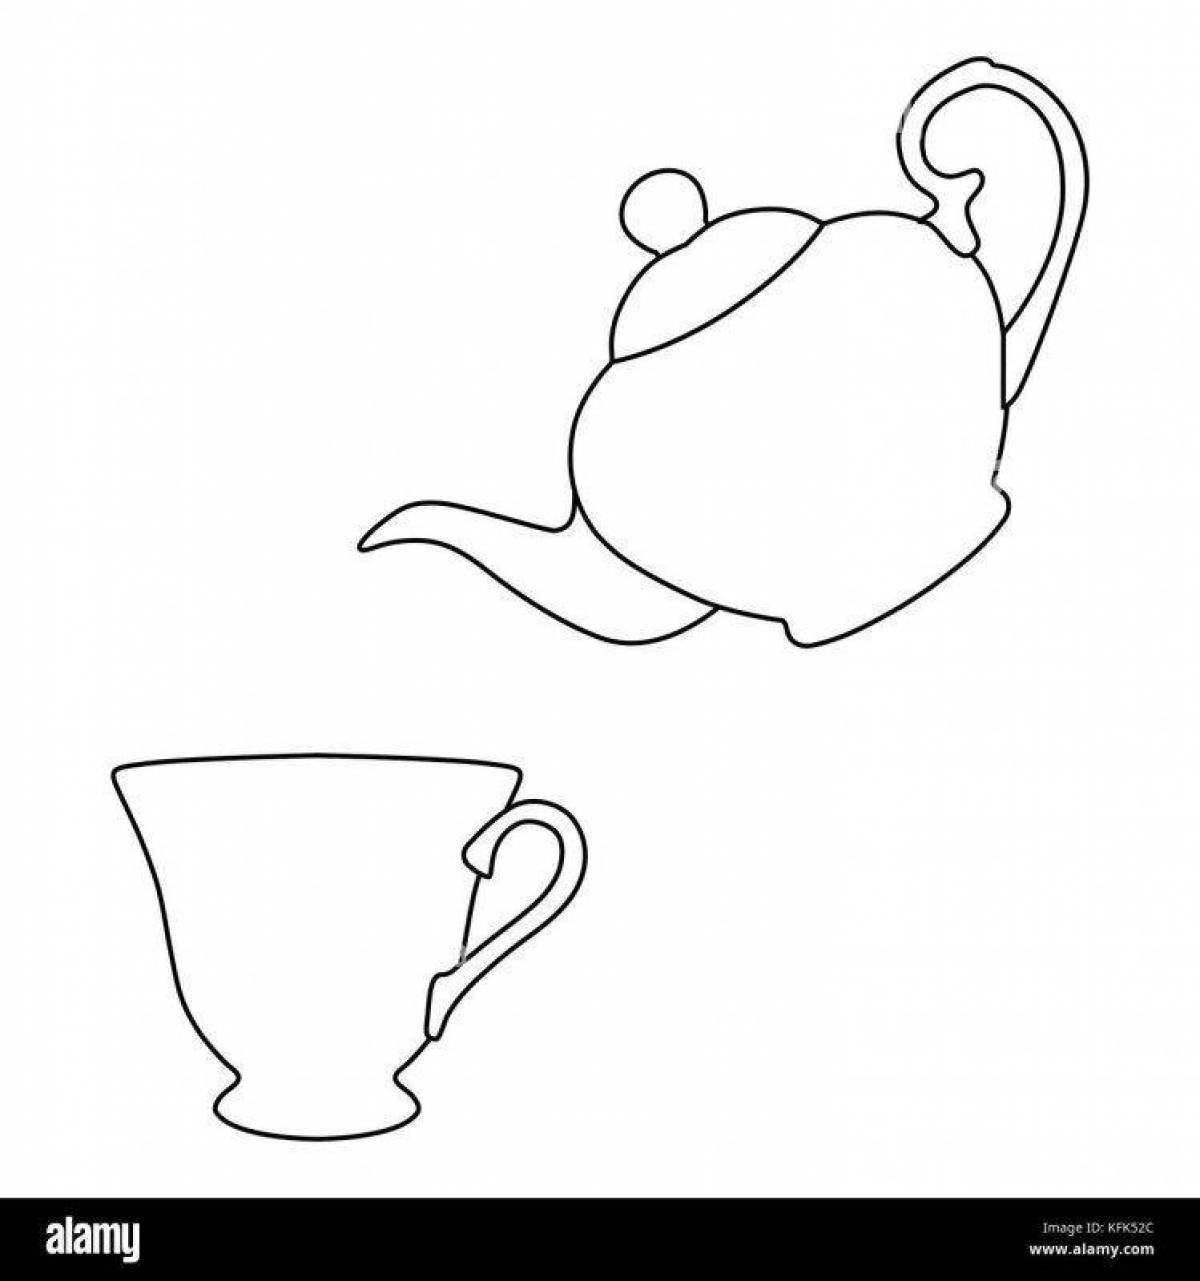 Coloring page elegant teapot and cup